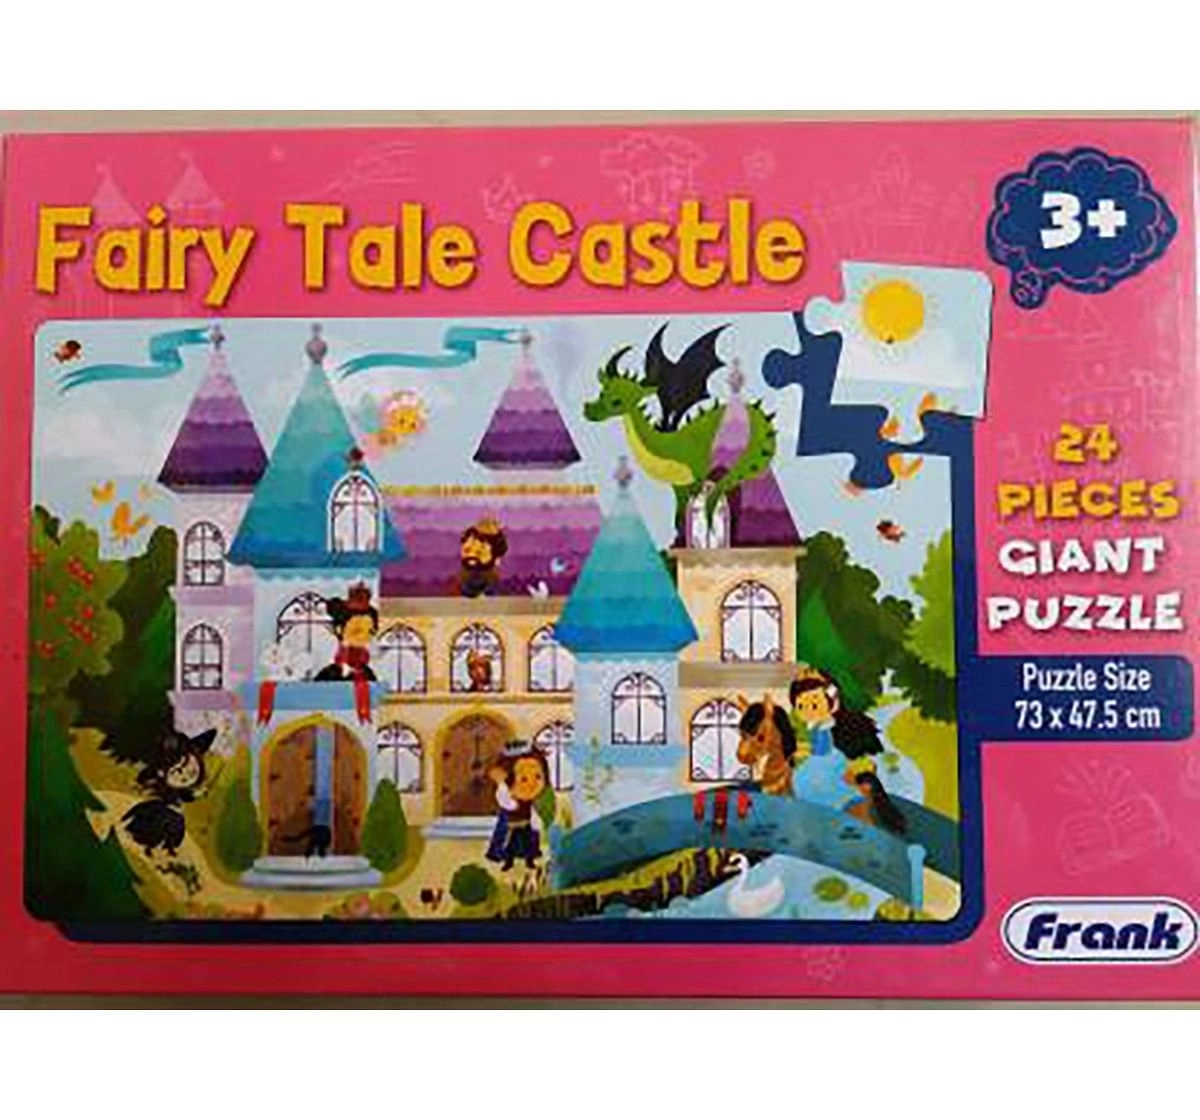 Frank Fairytale Castle Giant Floor Puzzle for Kids age 3Y+ 